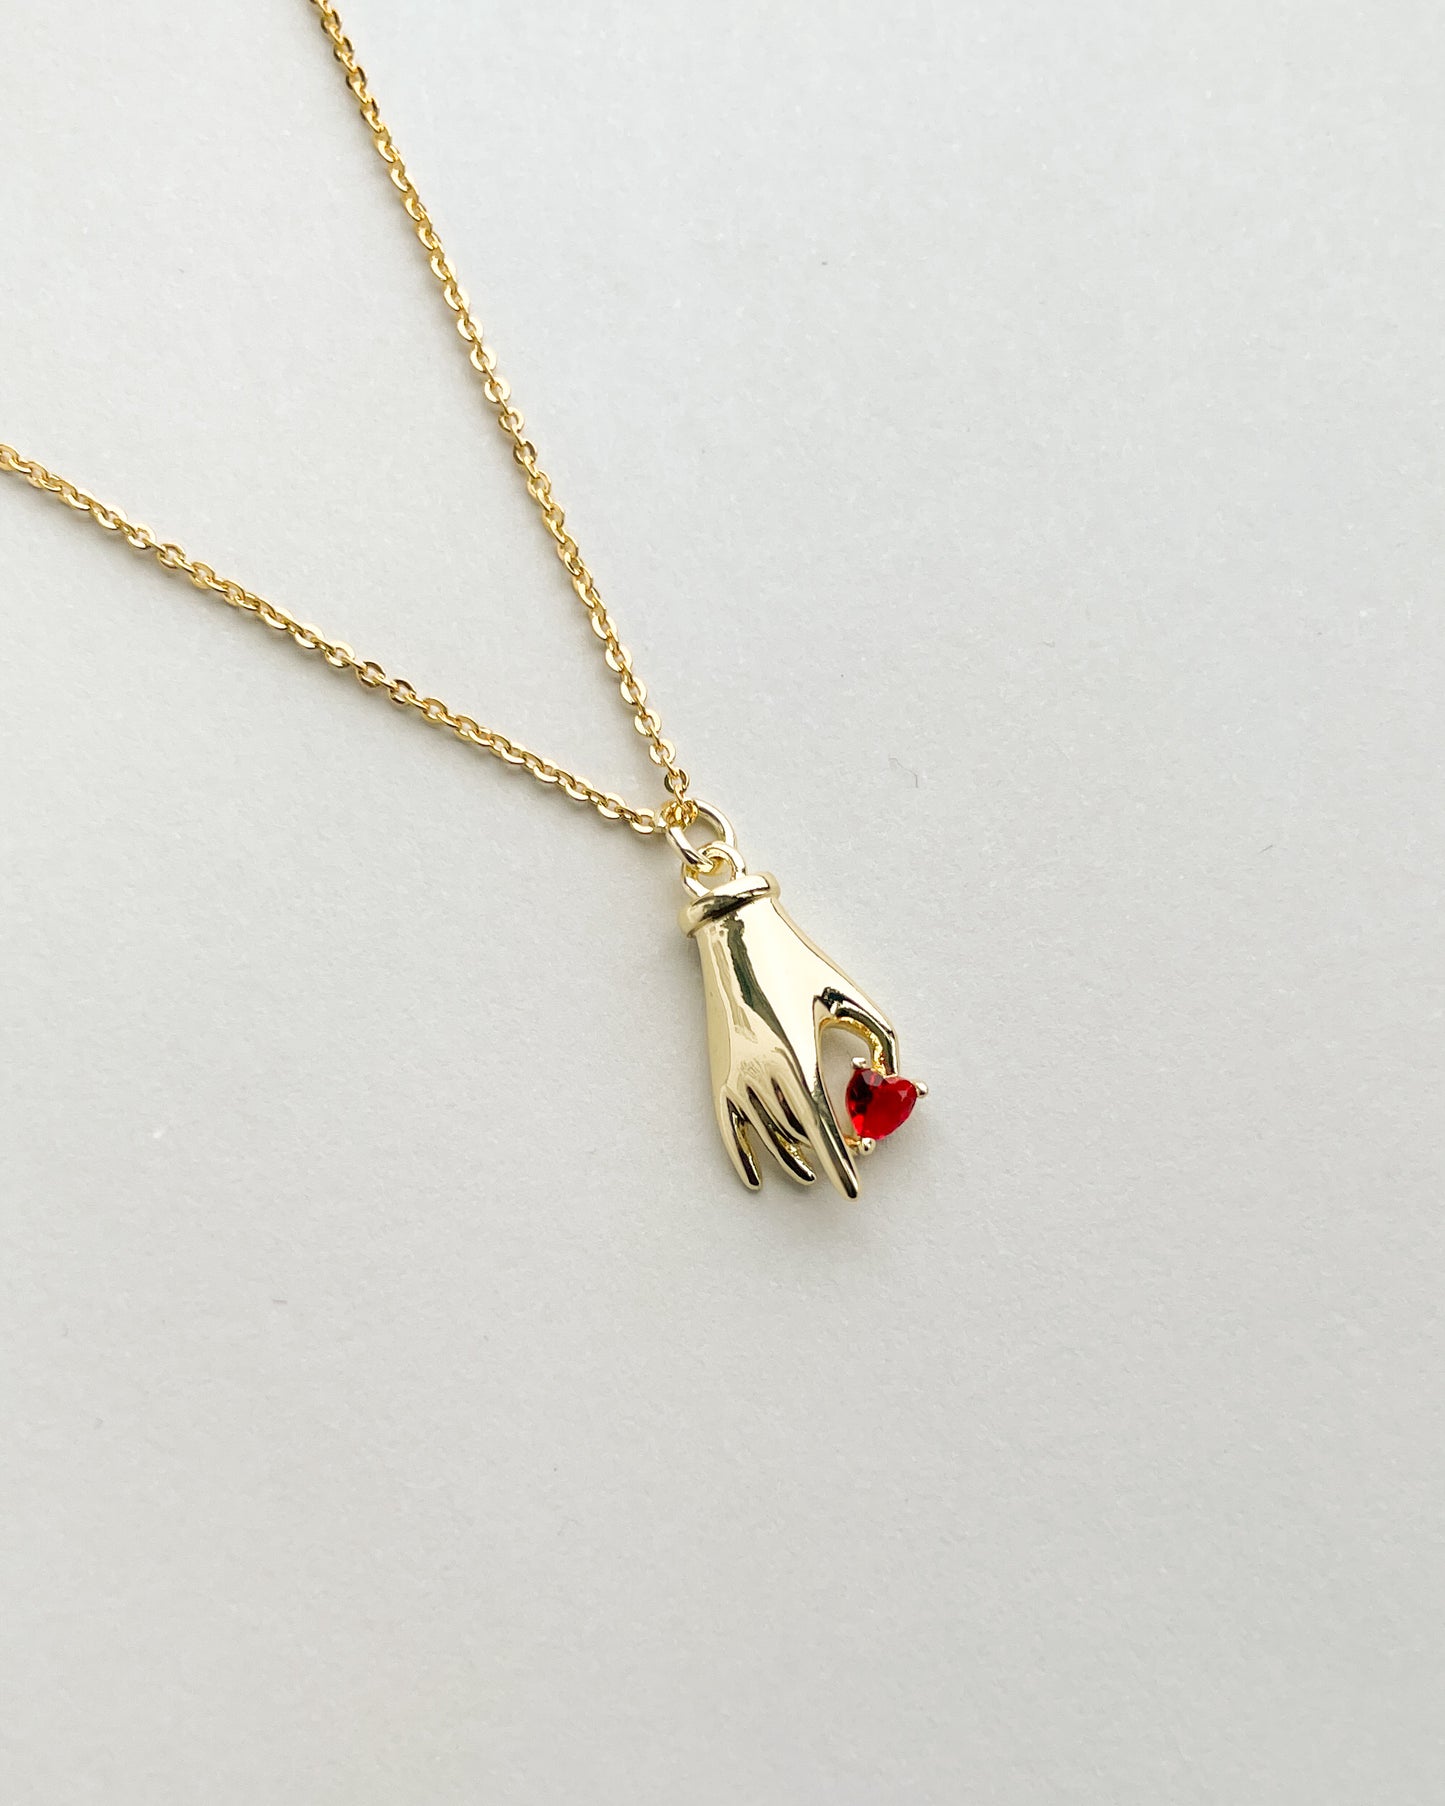 You Have My Heart Hand Pendant Necklace